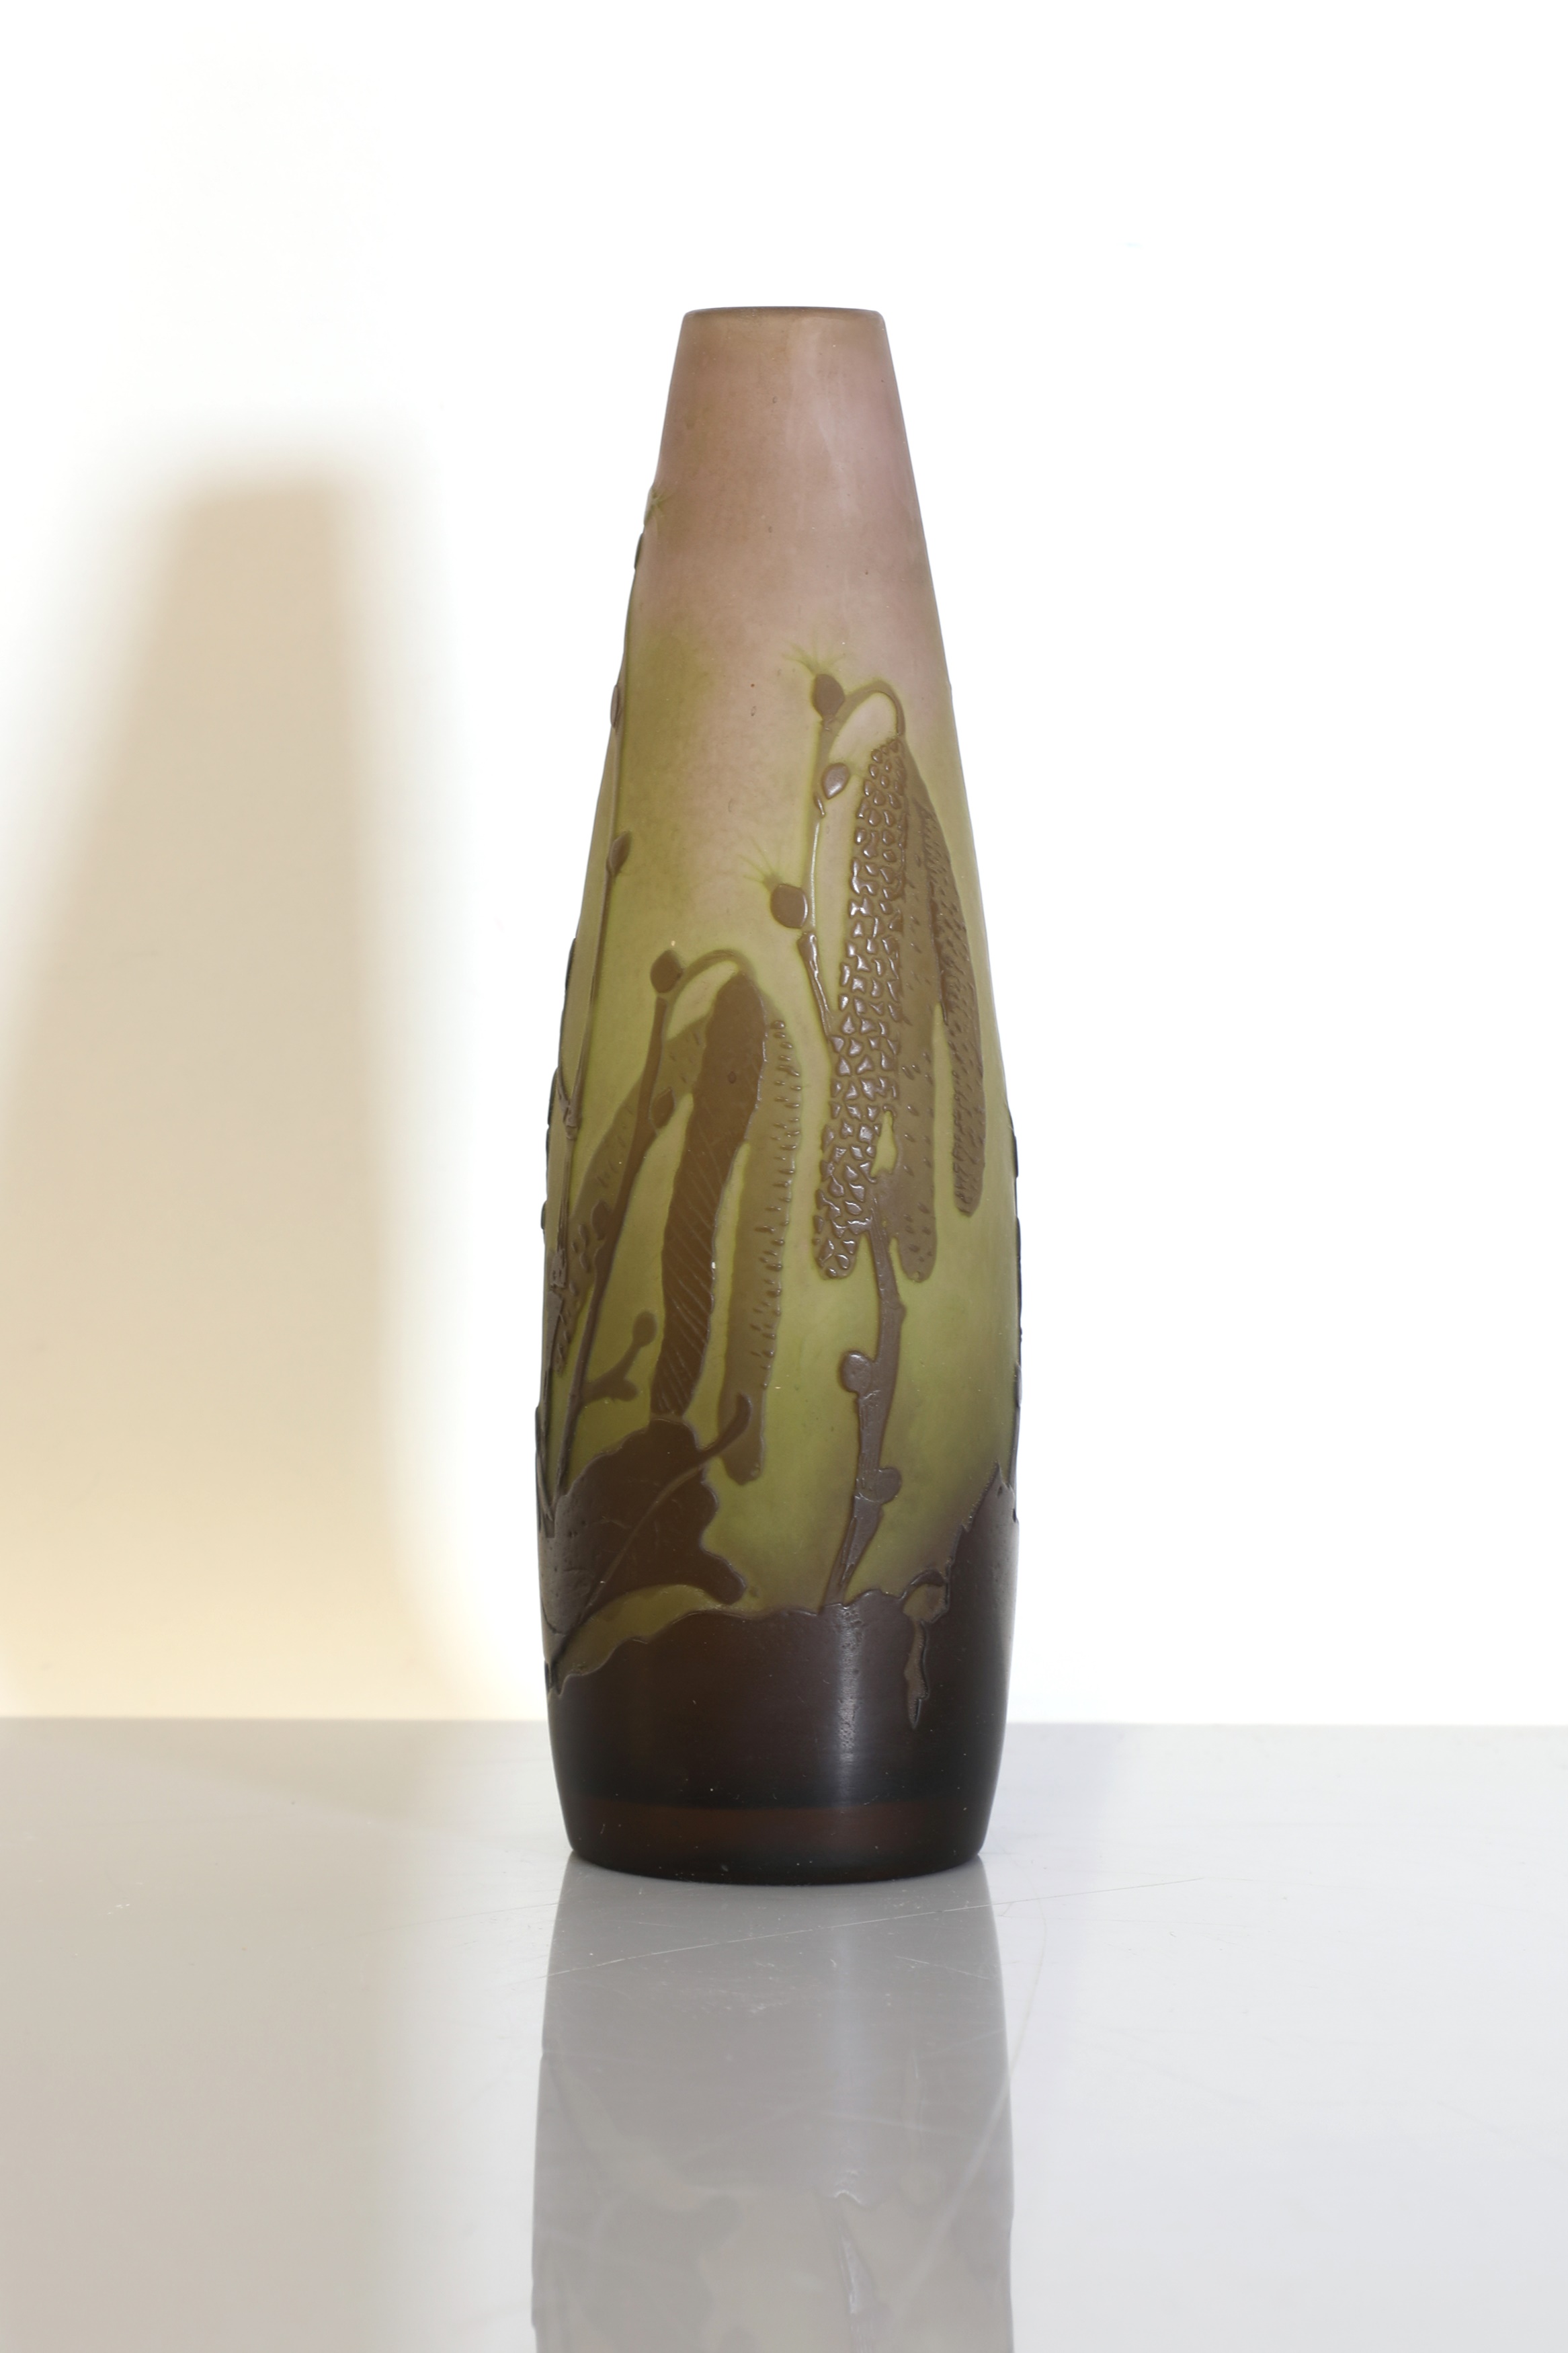 Emile Galle (1846-1904), a cameo glass vase, c.1900 (£300-500)